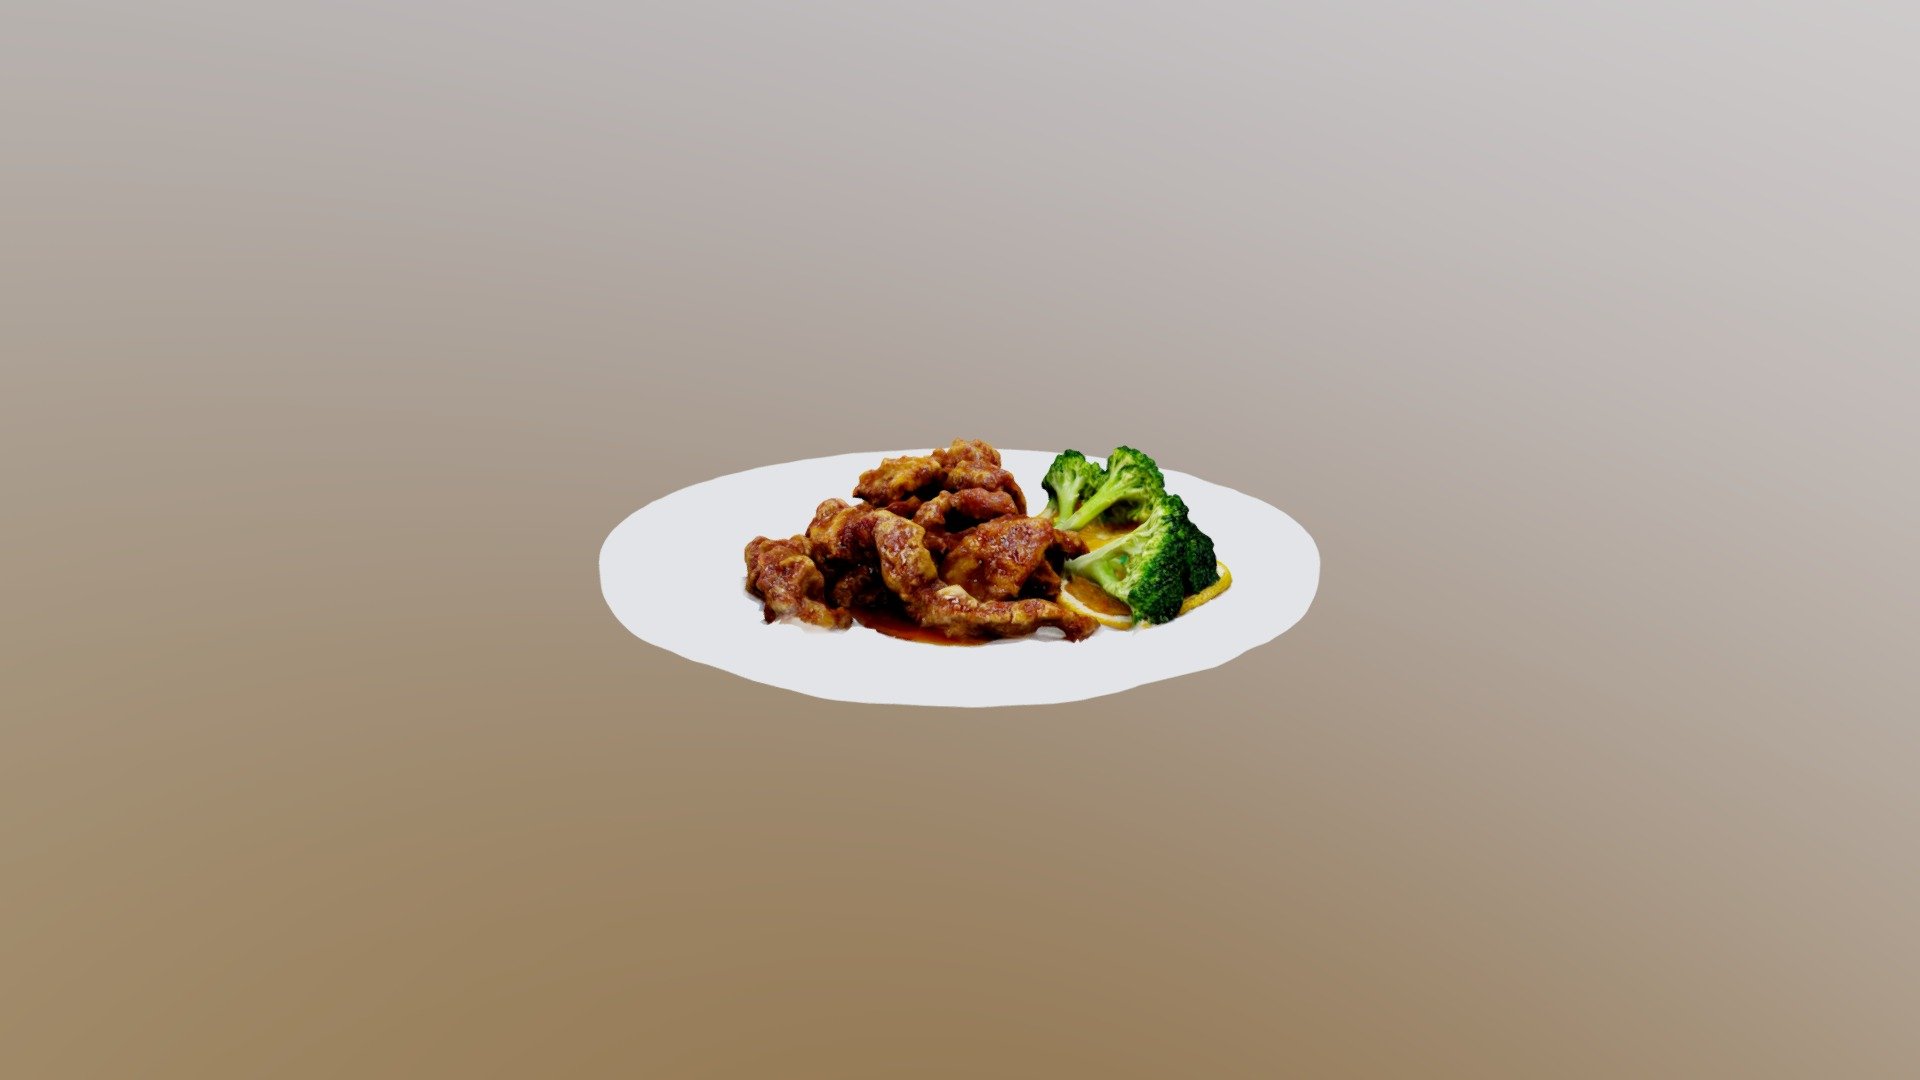 Emma's Orange Beef - 3D model by Augmented Reality Marketing Solutions LLC (@AugRealMarketing) 3d model